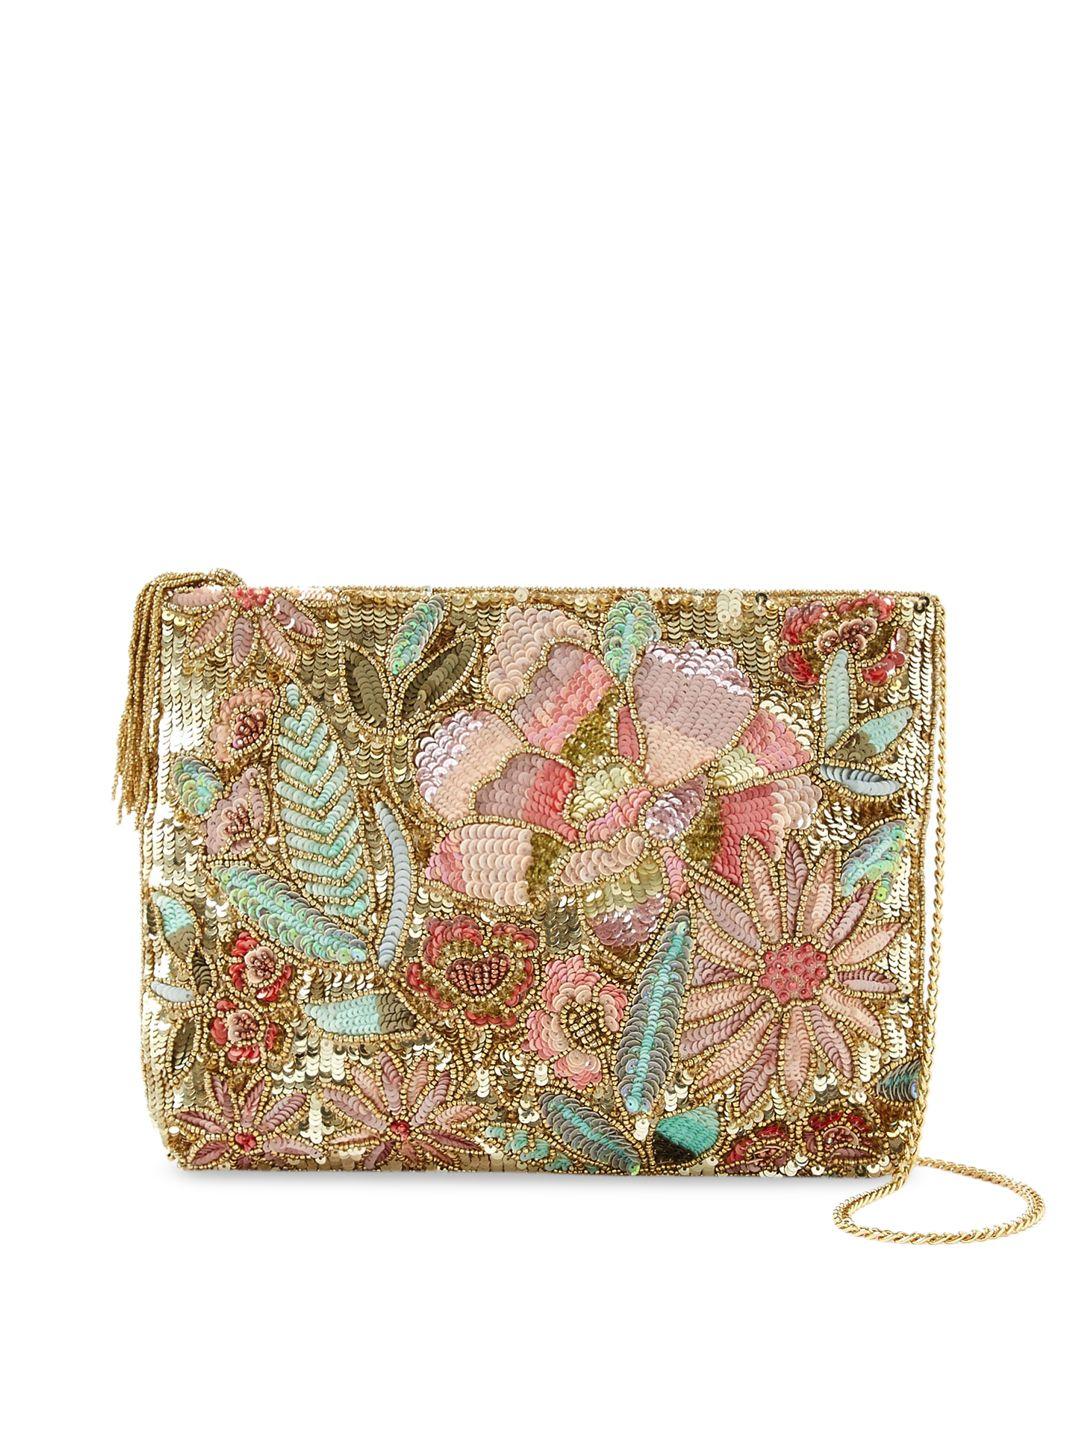 accessorize gold-toned floral textured structured sling bag